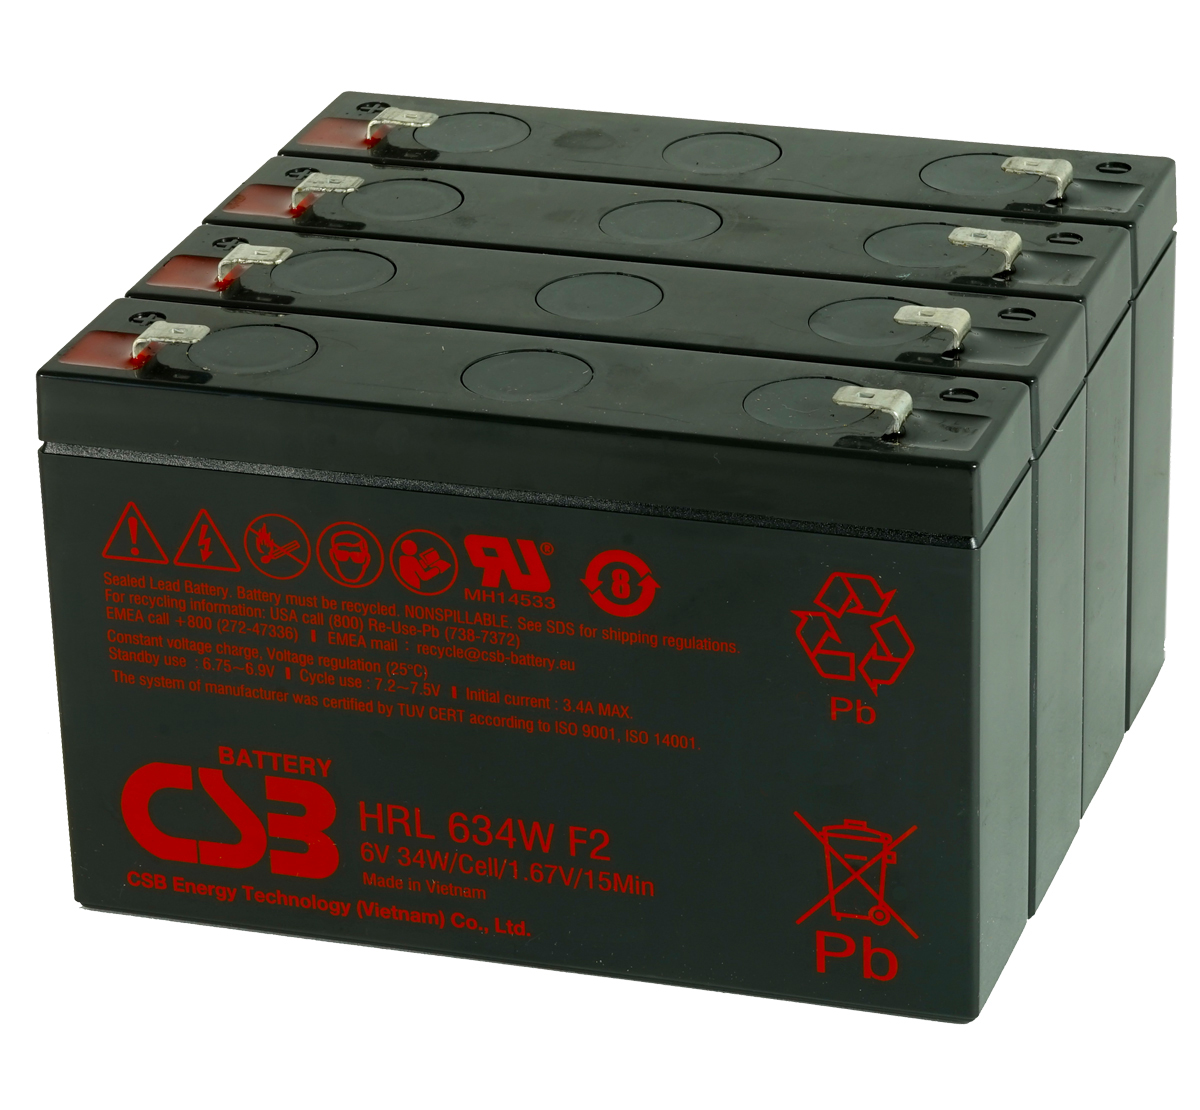 MDS2319 UPS Battery Kit for MGE AB2319